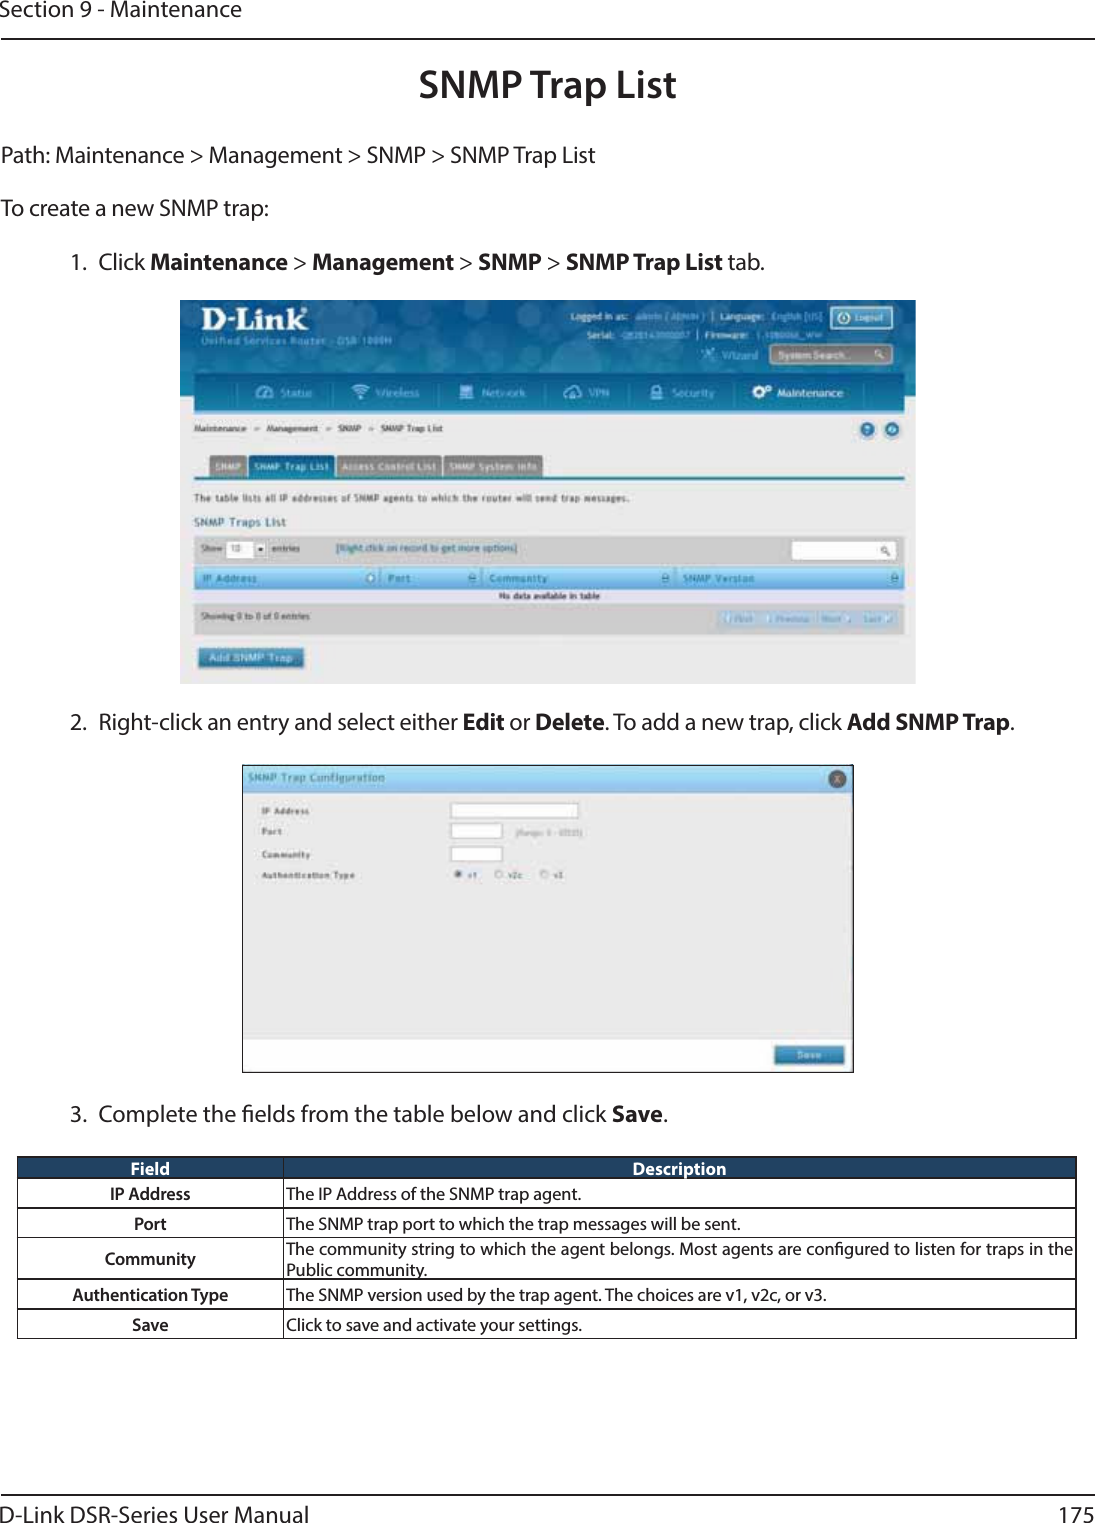 D-Link DSR-Series User Manual 175Section 9 - MaintenancePath: Maintenance &gt; Management &gt; SNMP &gt; SNMP Trap List To create a new SNMP trap:1. Click Maintenance &gt; Management &gt; SNMP &gt; SNMP Trap List tab.SNMP Trap List2.  Right-click an entry and select either Edit or Delete. To add a new trap, click Add SNMP Trap.3.  Complete the elds from the table below and click Save.Field DescriptionIP Address The IP Address of the SNMP trap agent.Port The SNMP trap port to which the trap messages will be sent.Community The community string to which the agent belongs. Most agents are congured to listen for traps in the Public community.Authentication Type The SNMP version used by the trap agent. The choices are v1, v2c, or v3.Save Click to save and activate your settings.